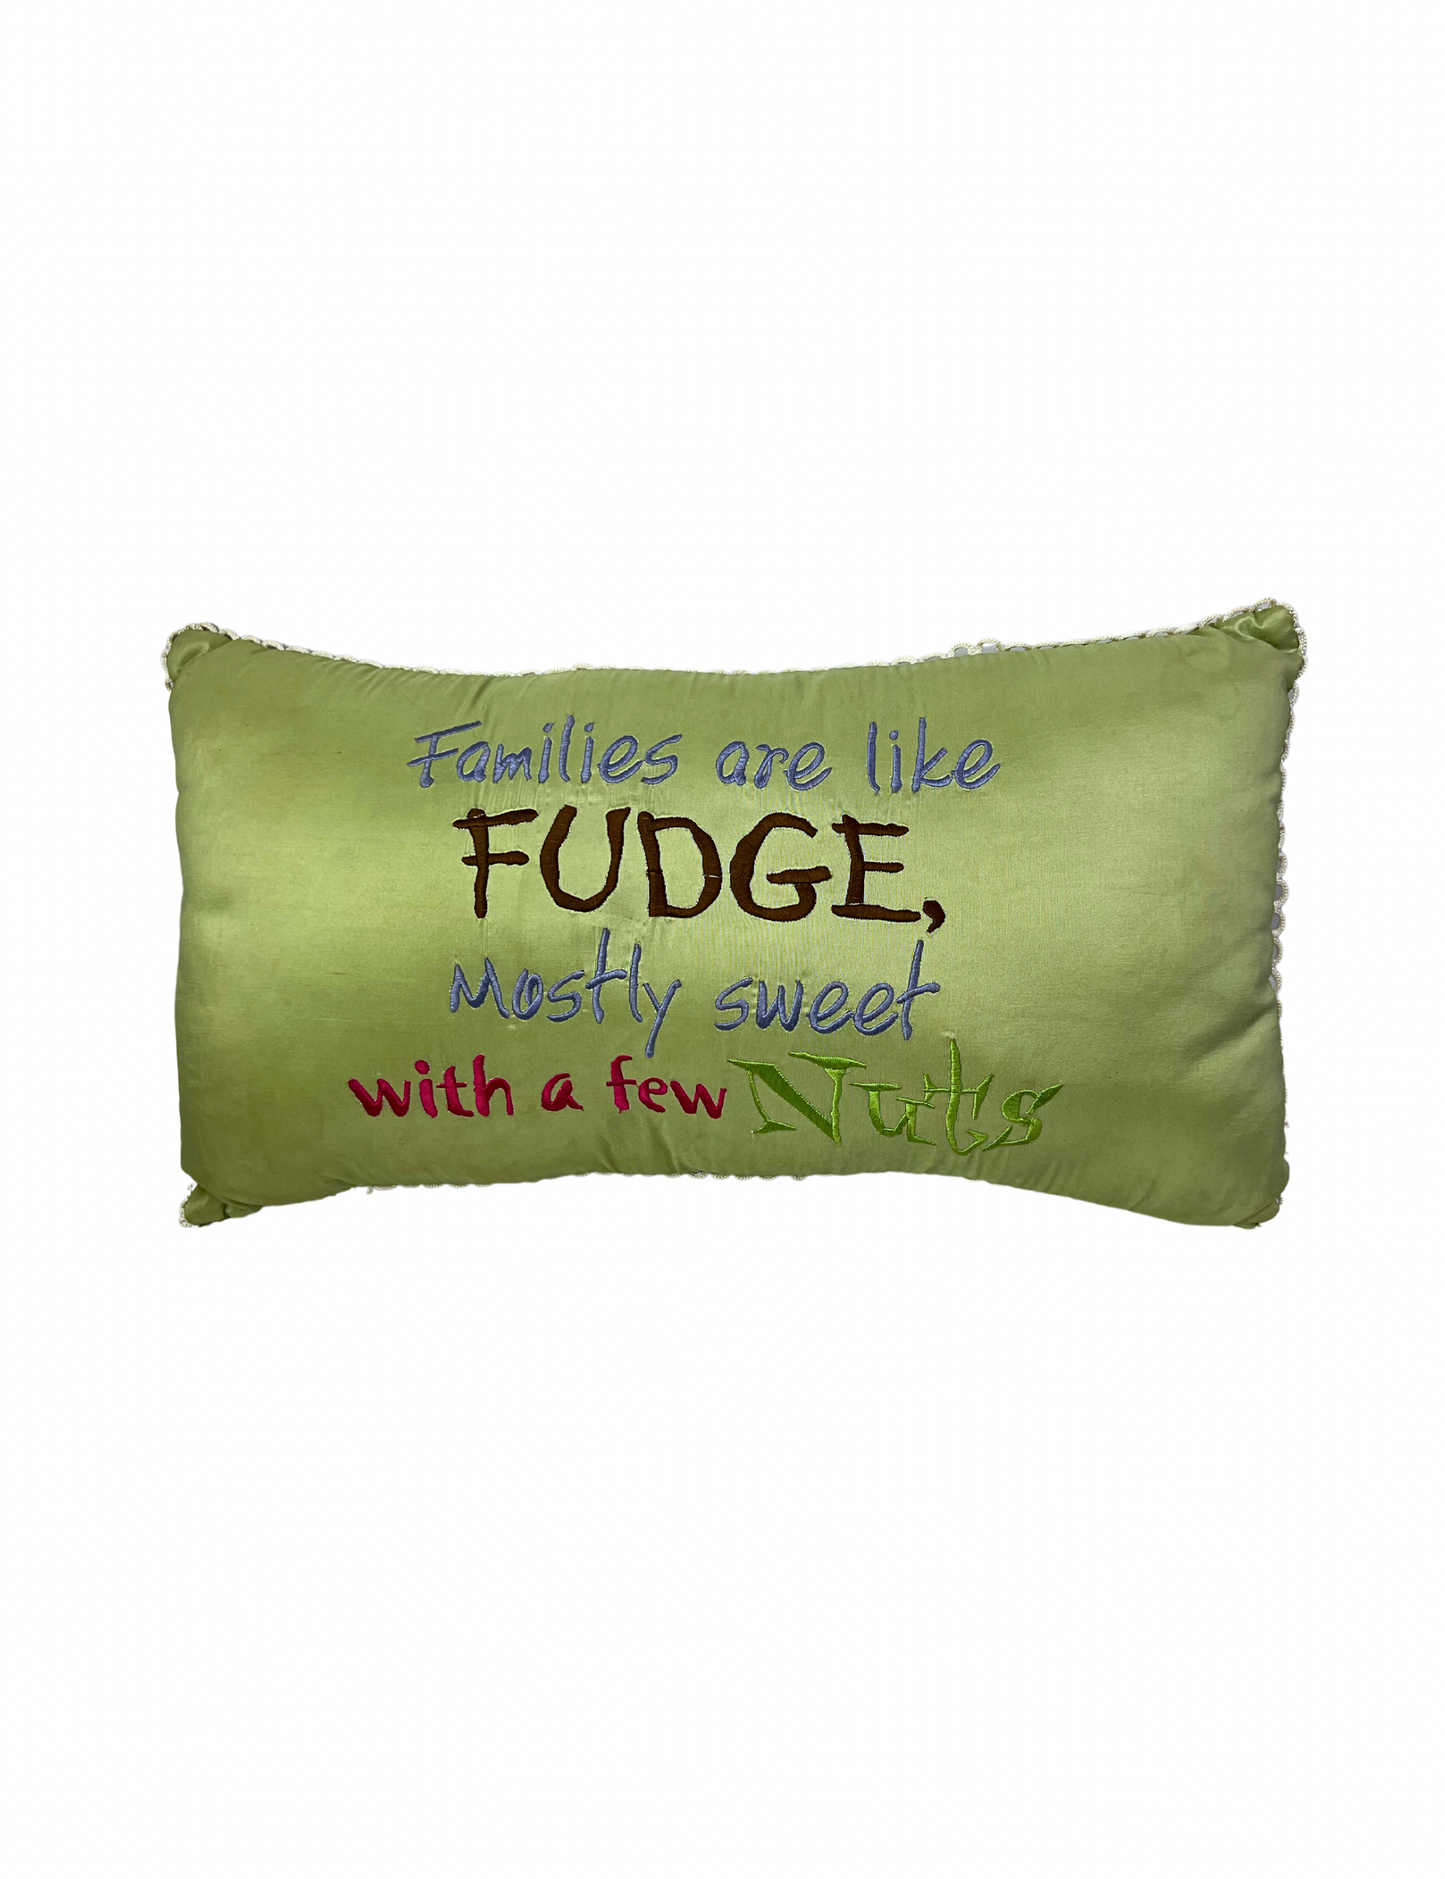 90’s Families Are Like Fudge, Mostly Sweet With a Few Nuts Throw Pillow 15” x 10”